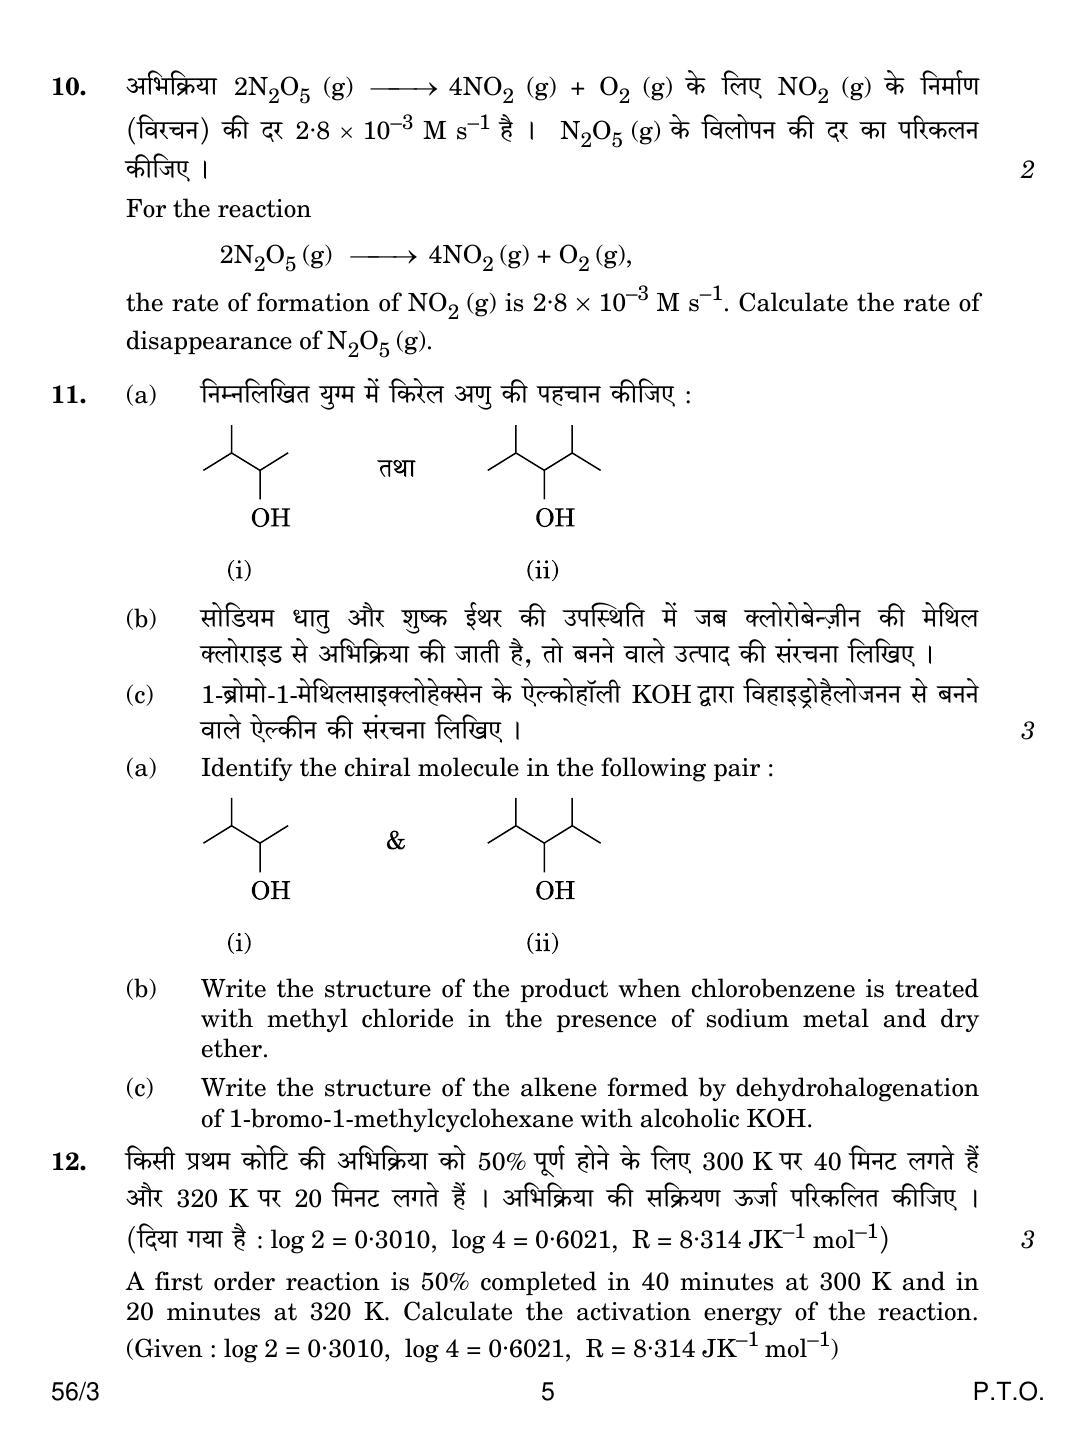 CBSE Class 12 56-3 CHEMISTRY 2018 Question Paper - Page 5